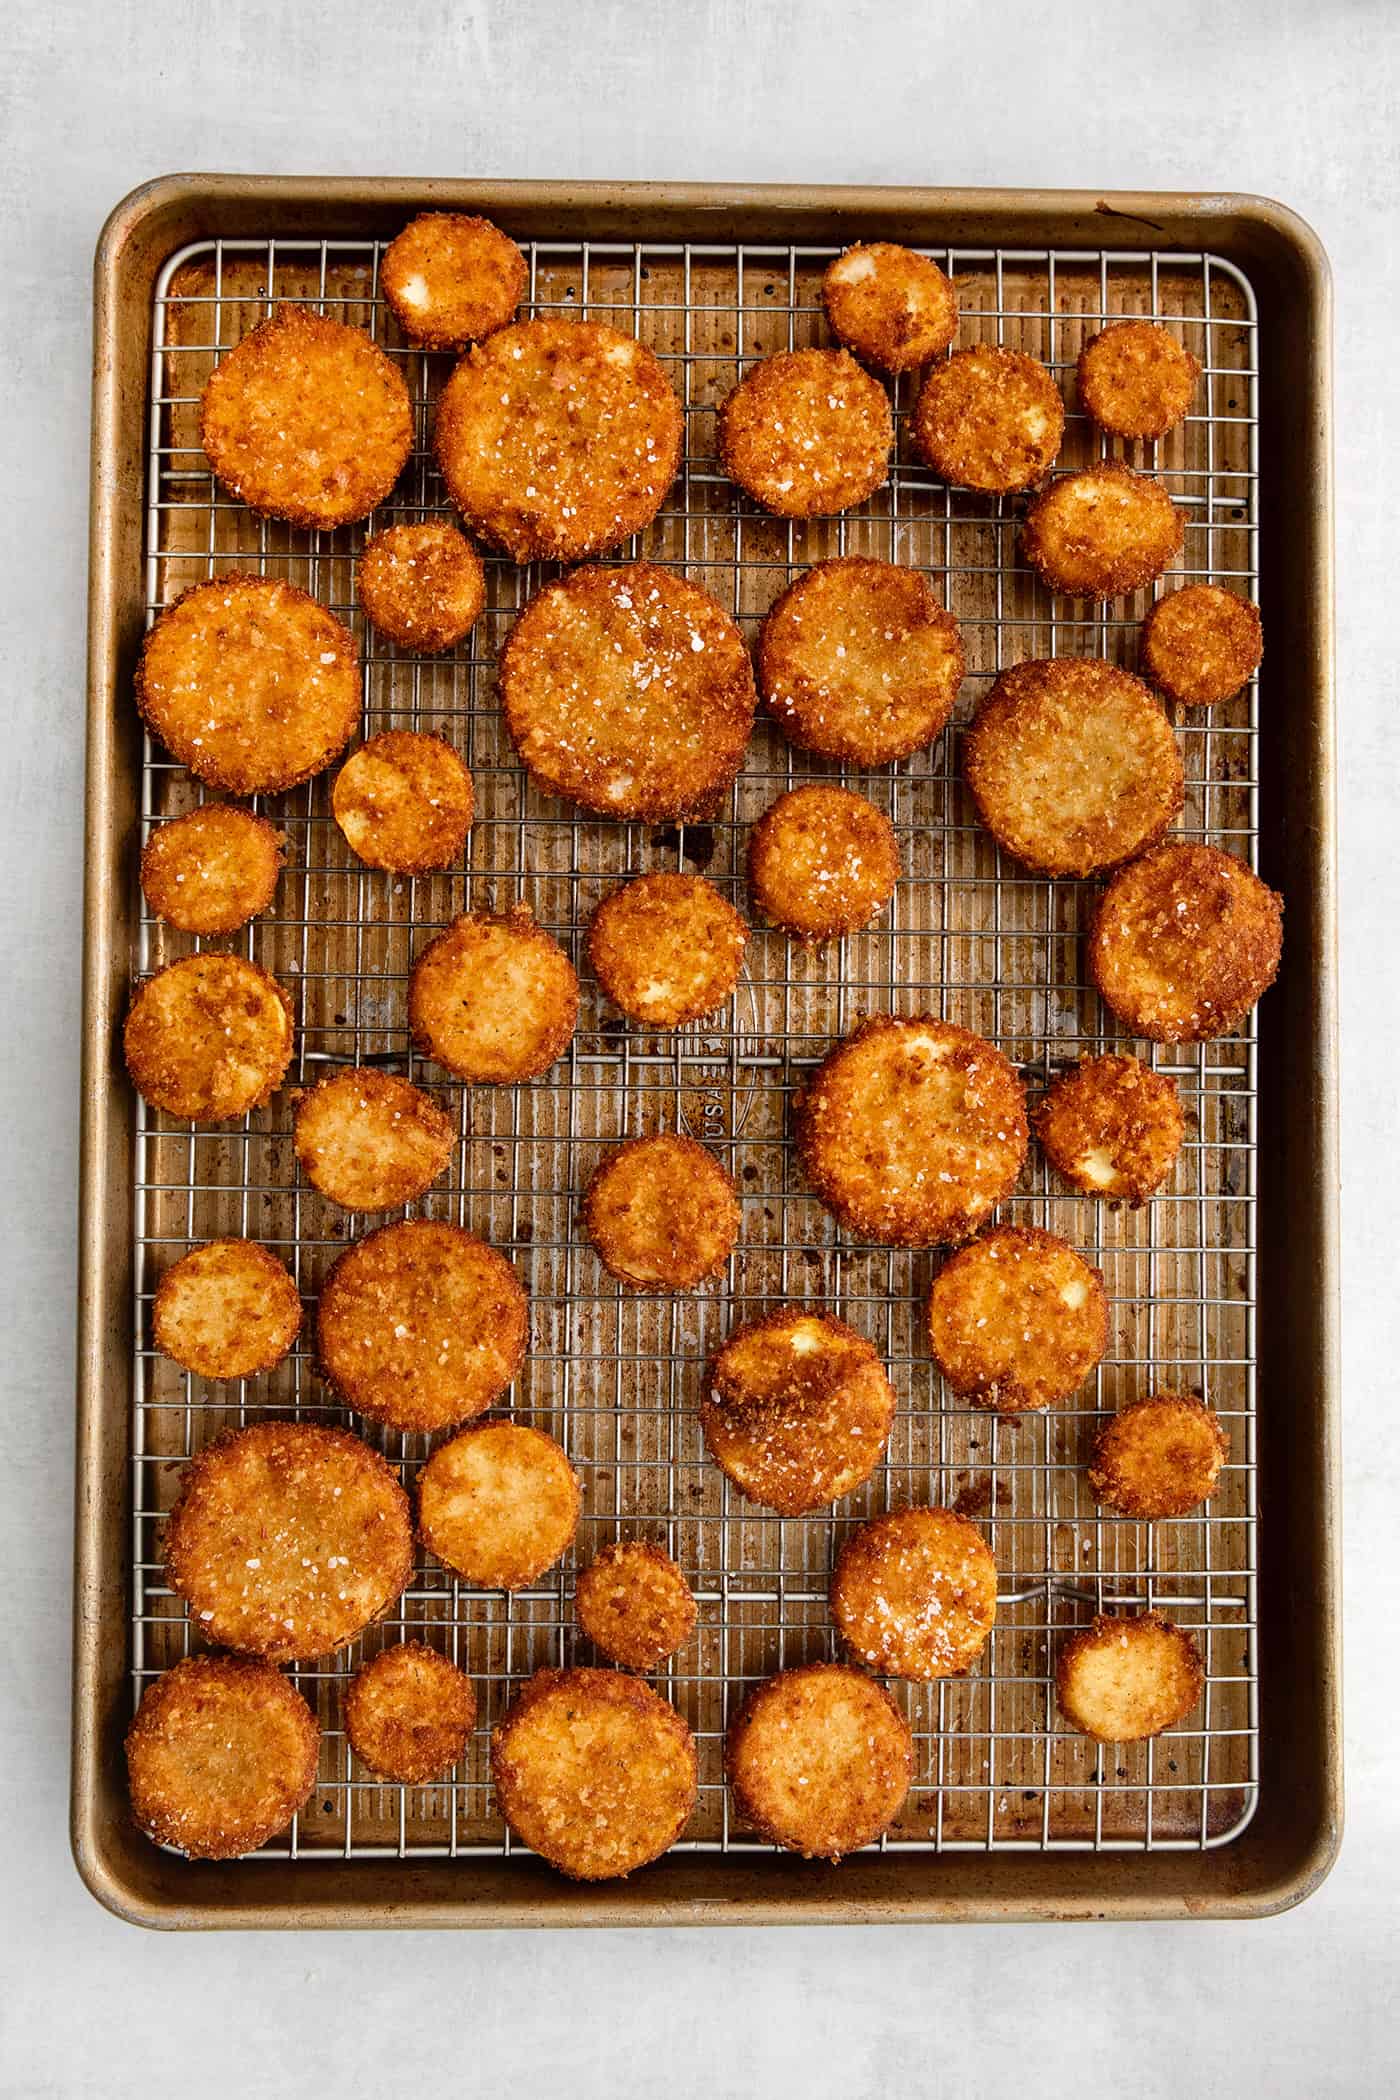 Overhead view of fried squash on a wire rack